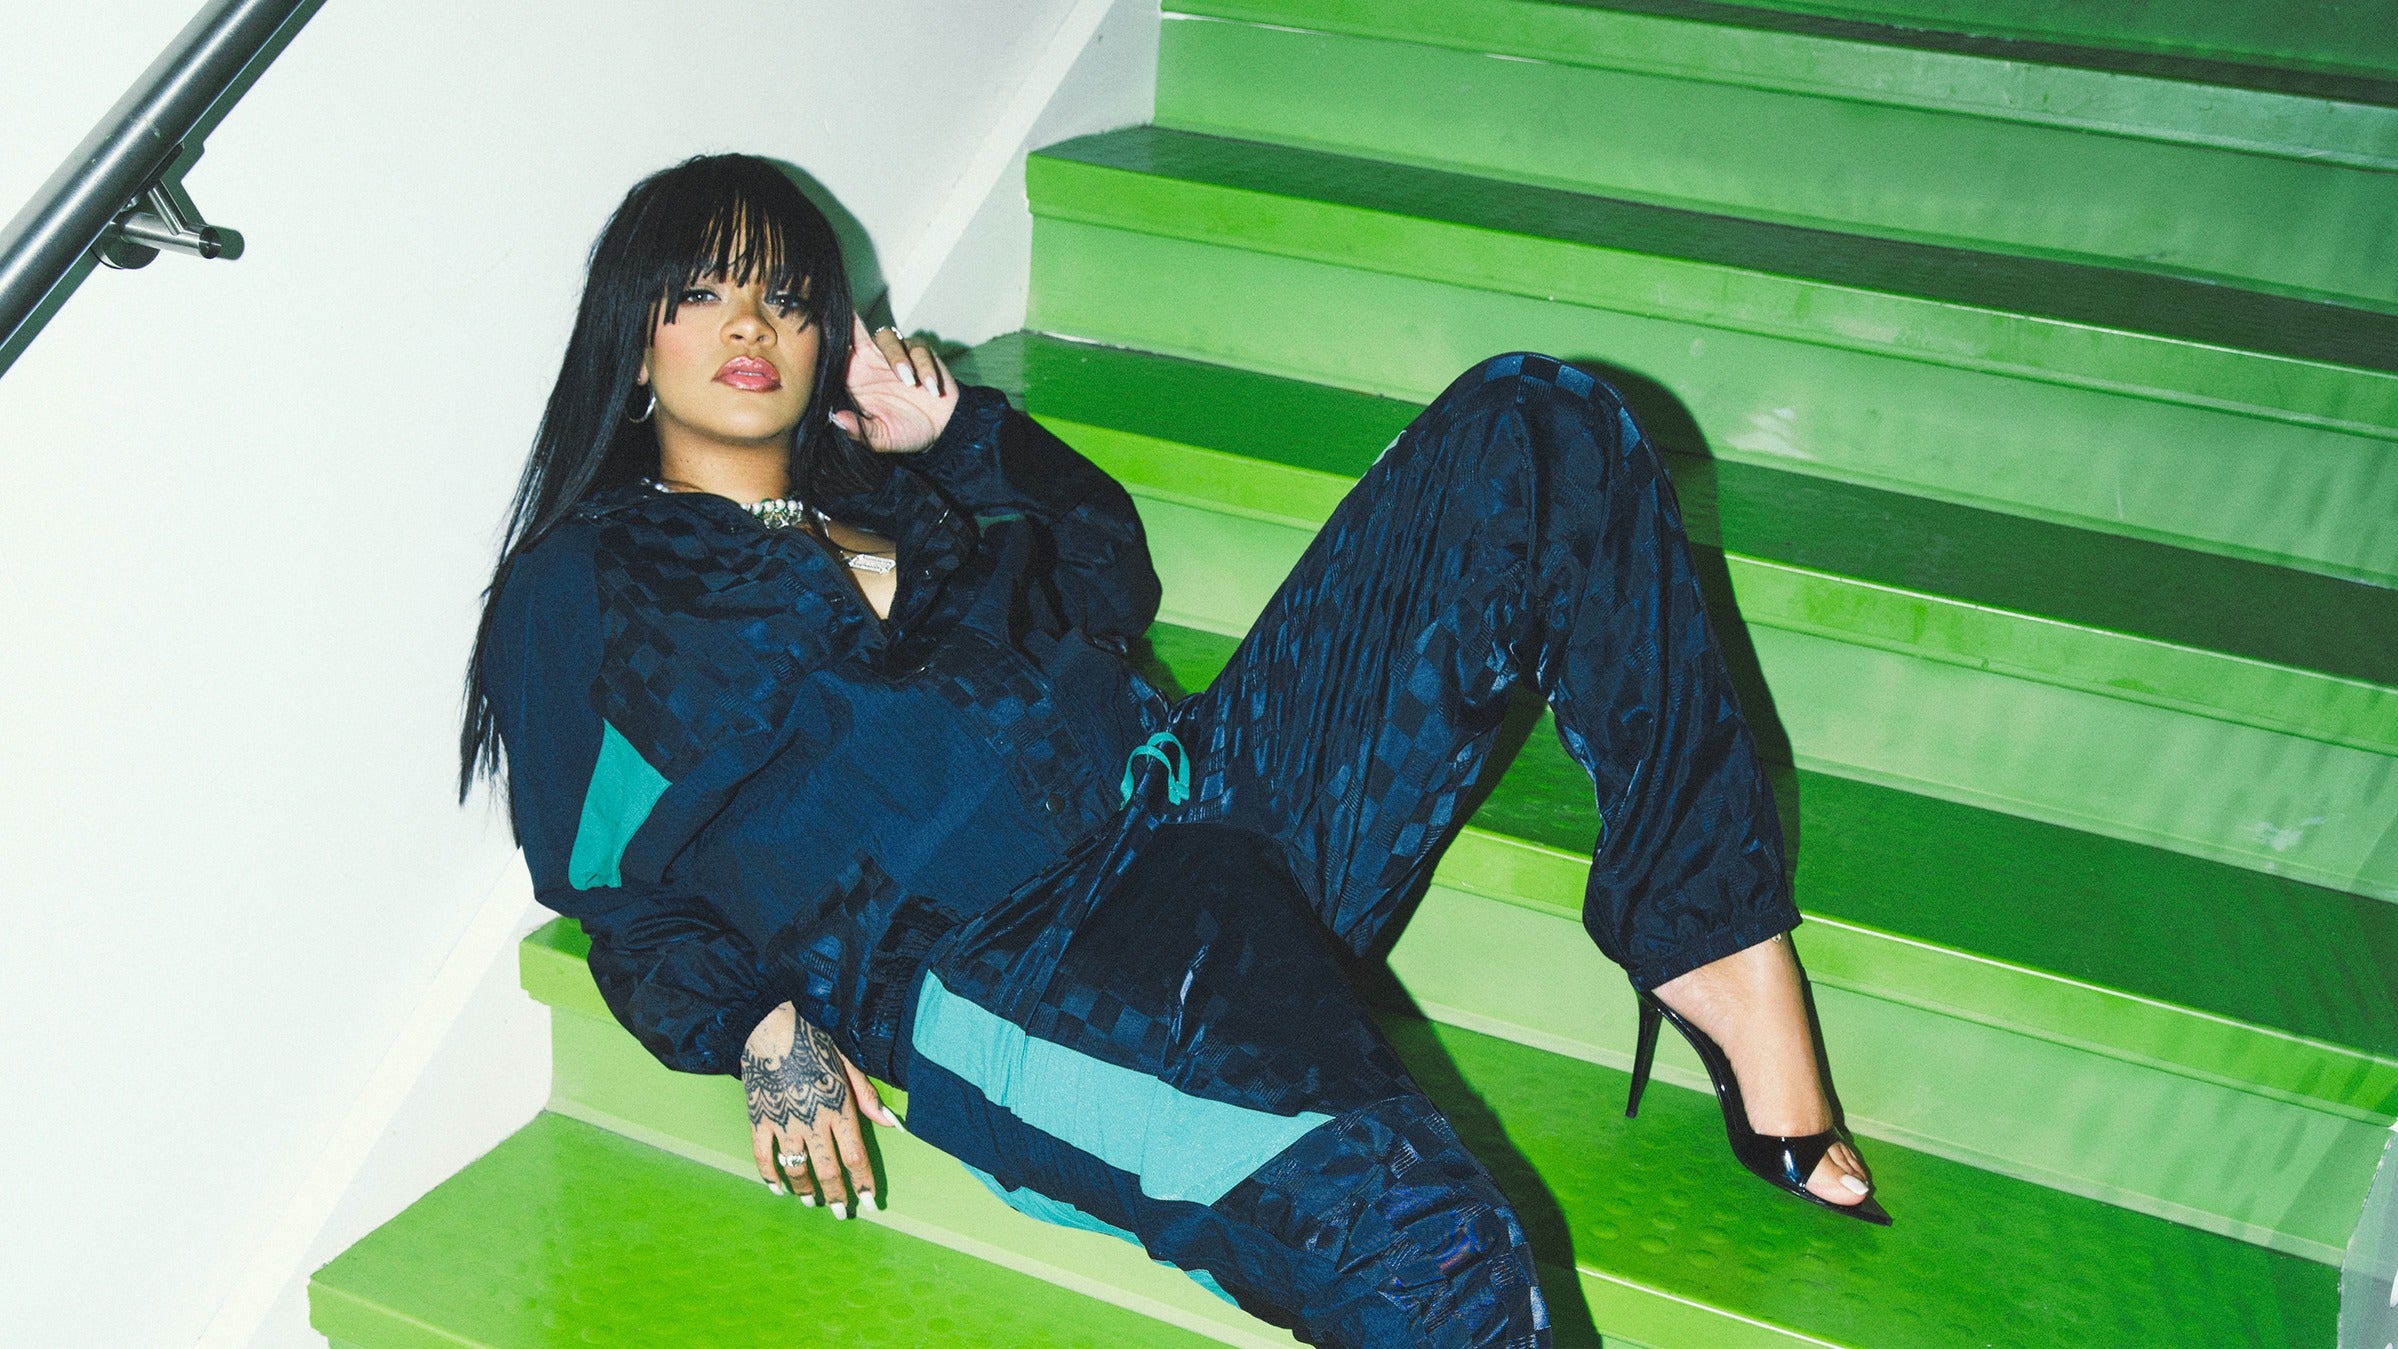 Rihanna On Savage x Fenty Volume 4, Being a New Mom, and the Super Bowl